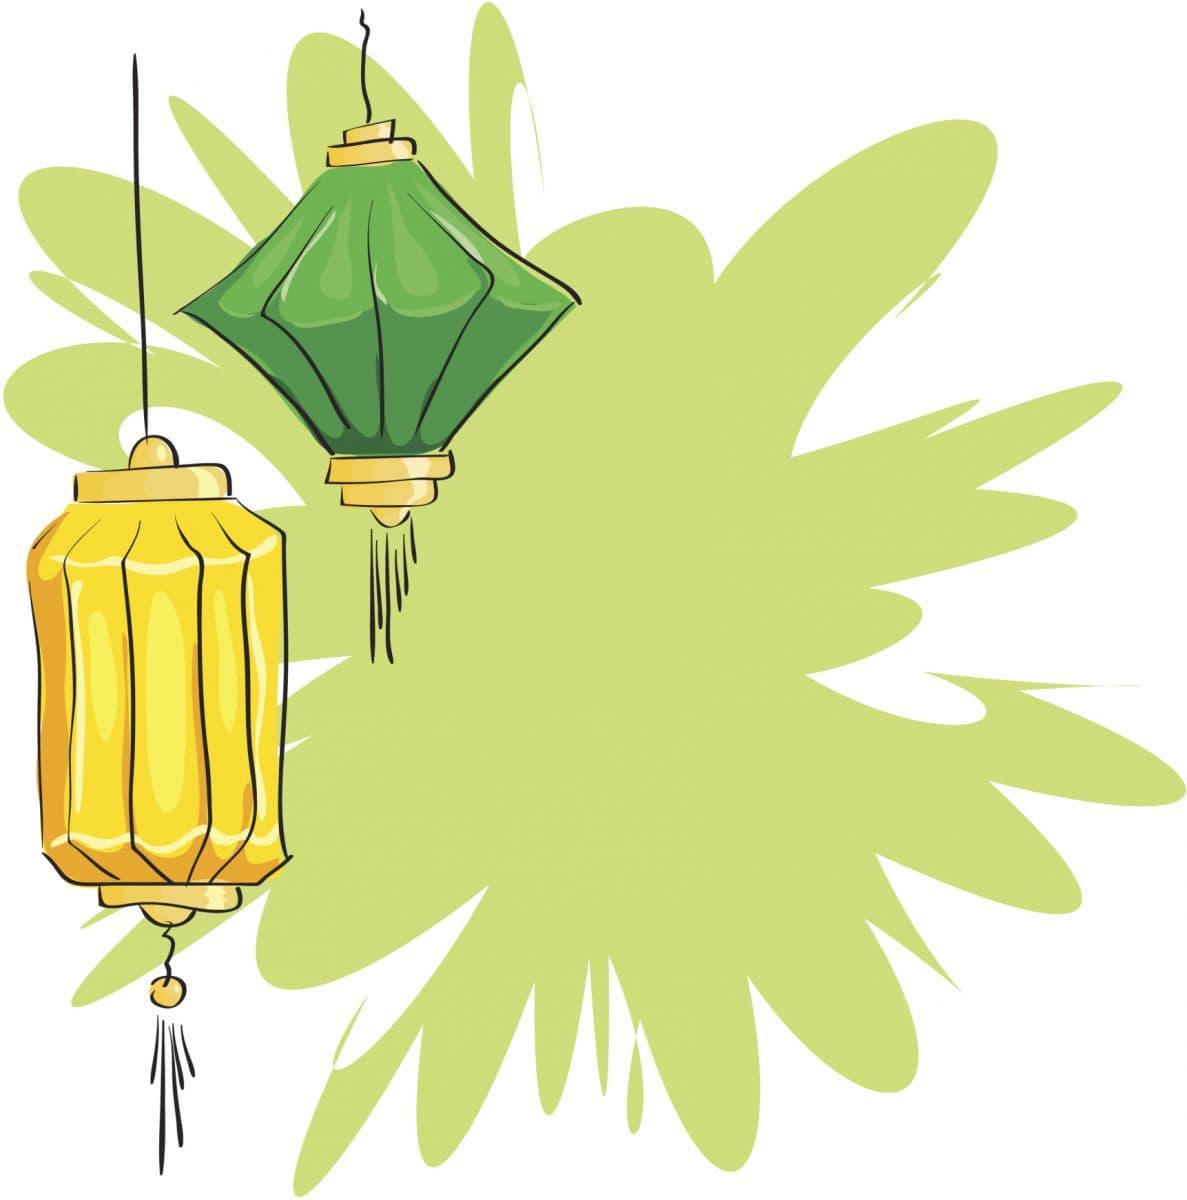 Cute Craft Projects: Chinese Paper Lanterns